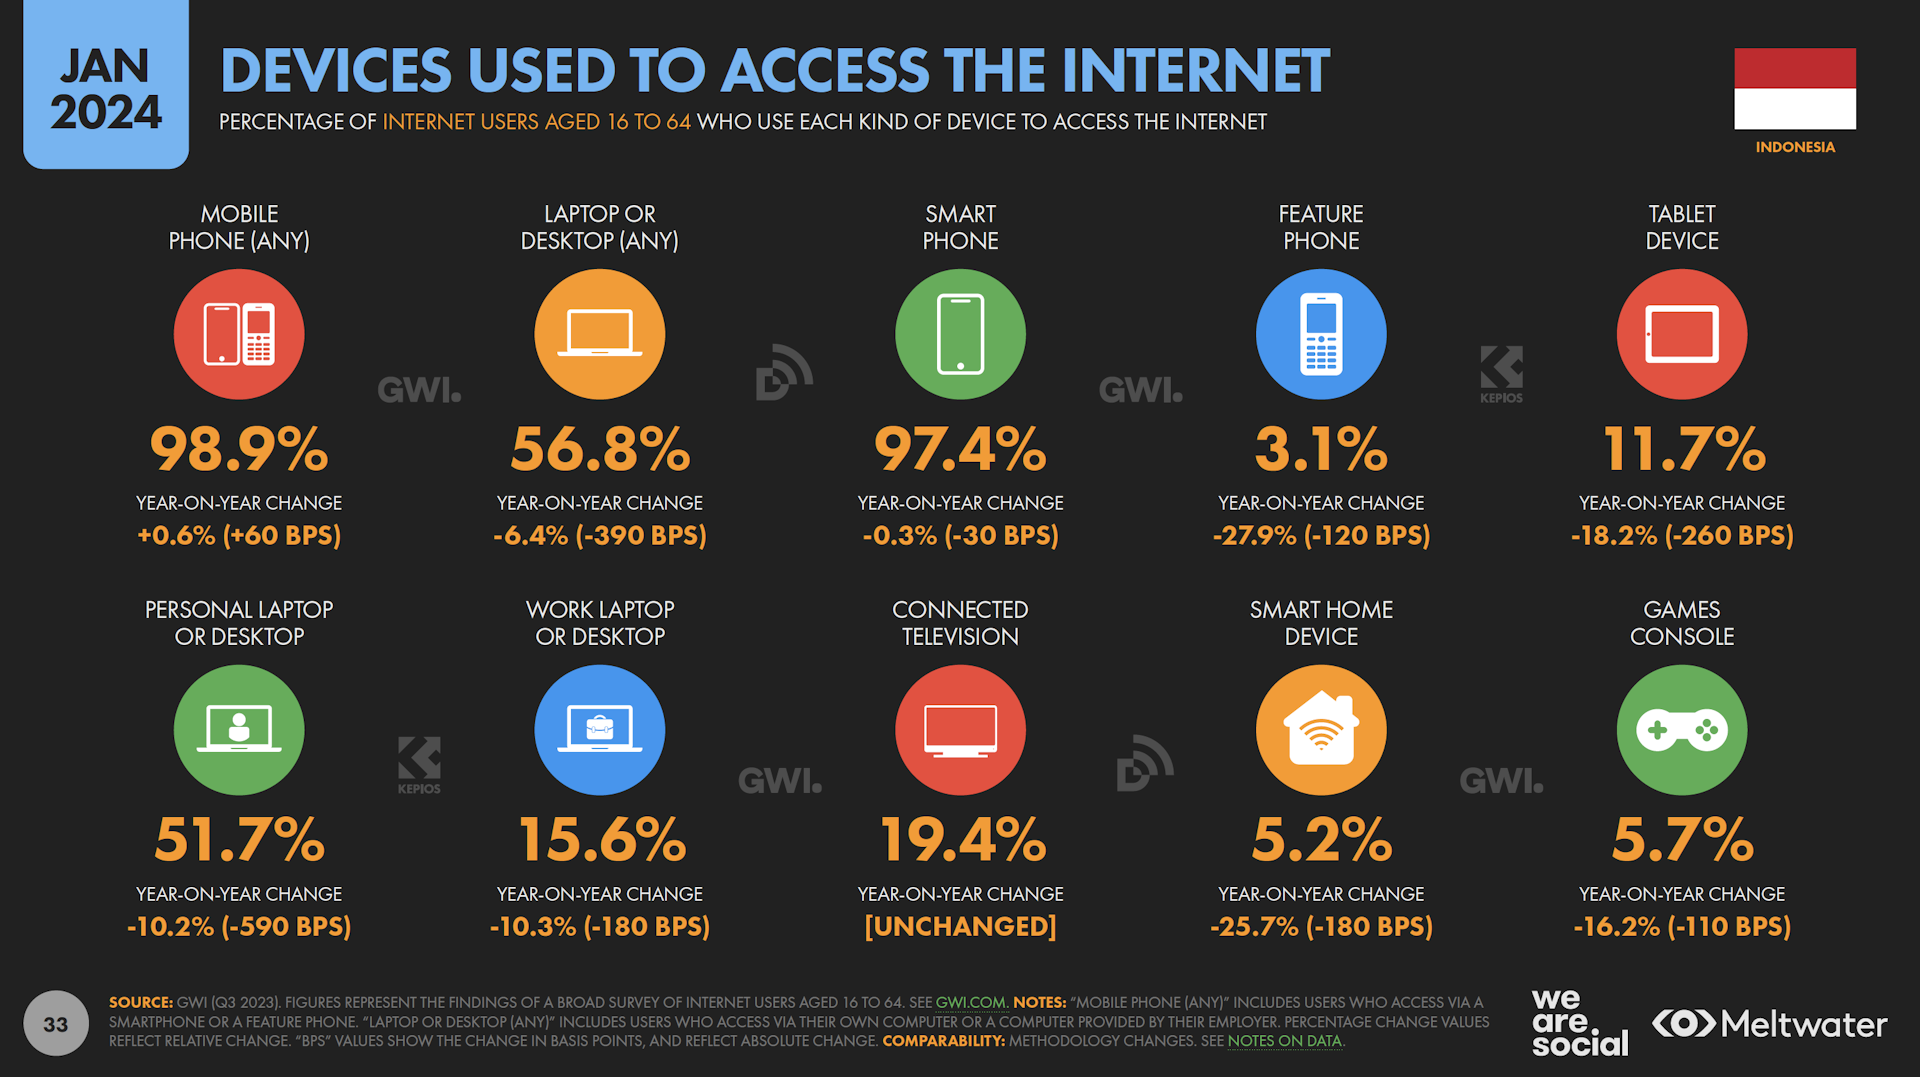 Devices used to access the internet based on Global Digital Report 2024 for Indonesia